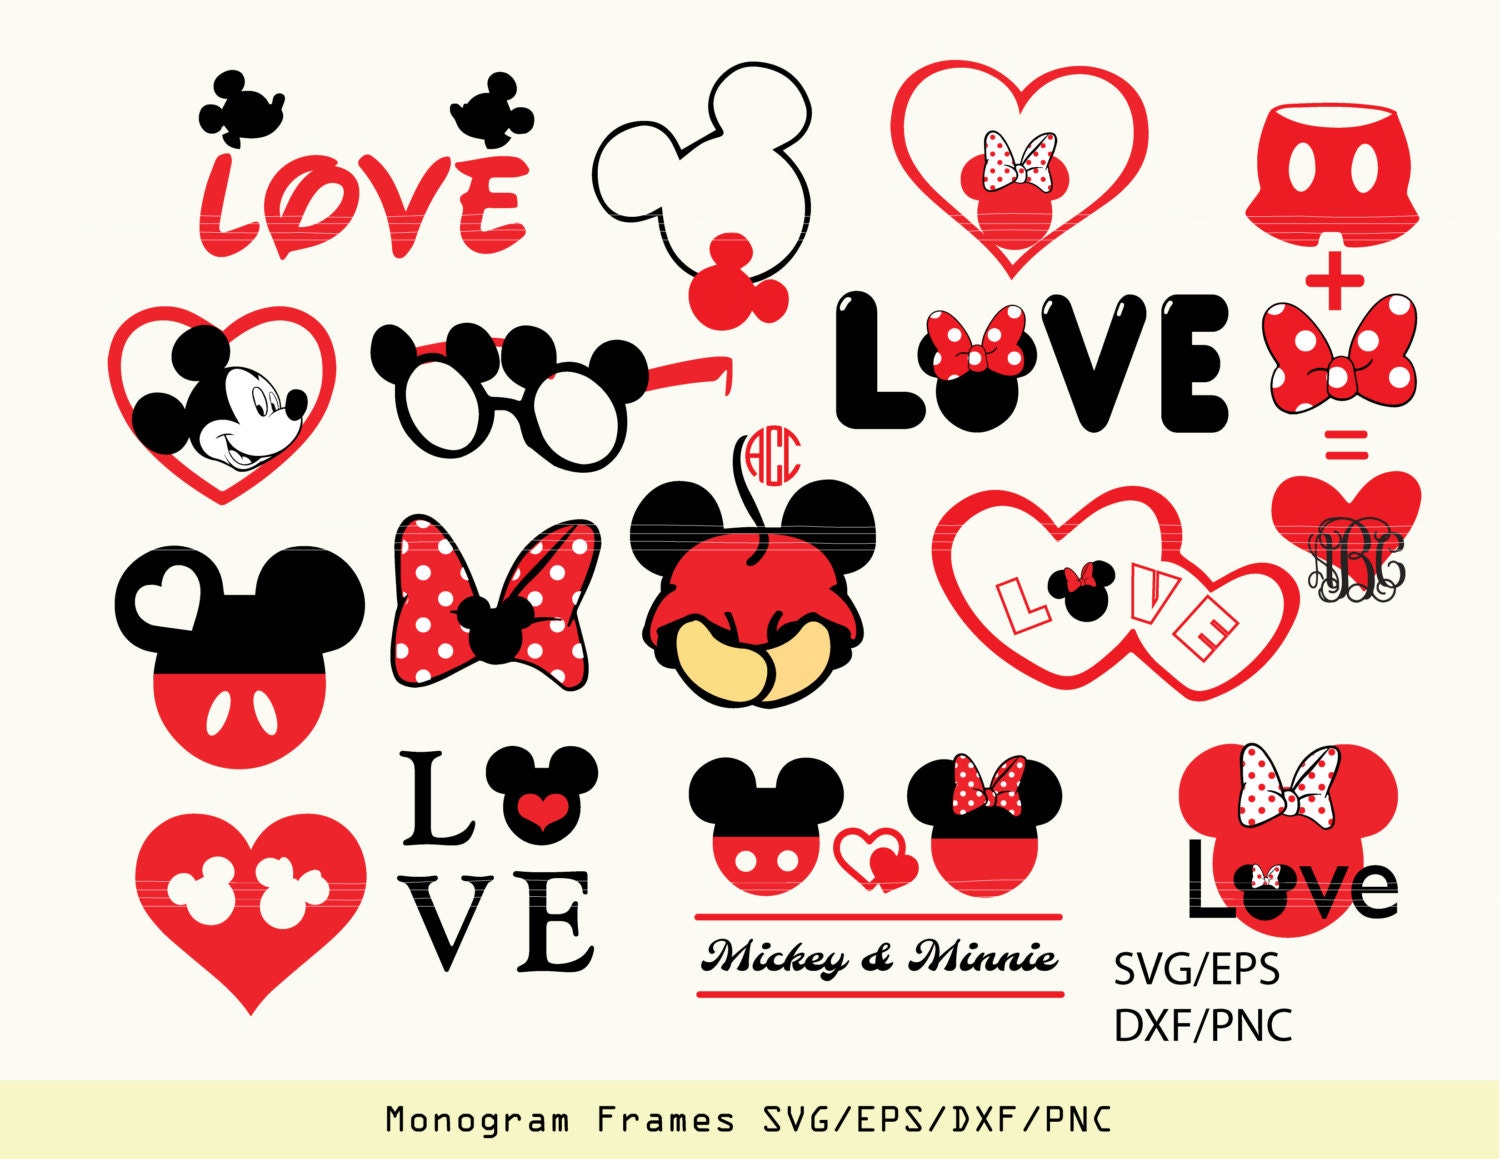 Download INSTANT DOWNLOAD SVG Mickey and Minnie love heart vectors for